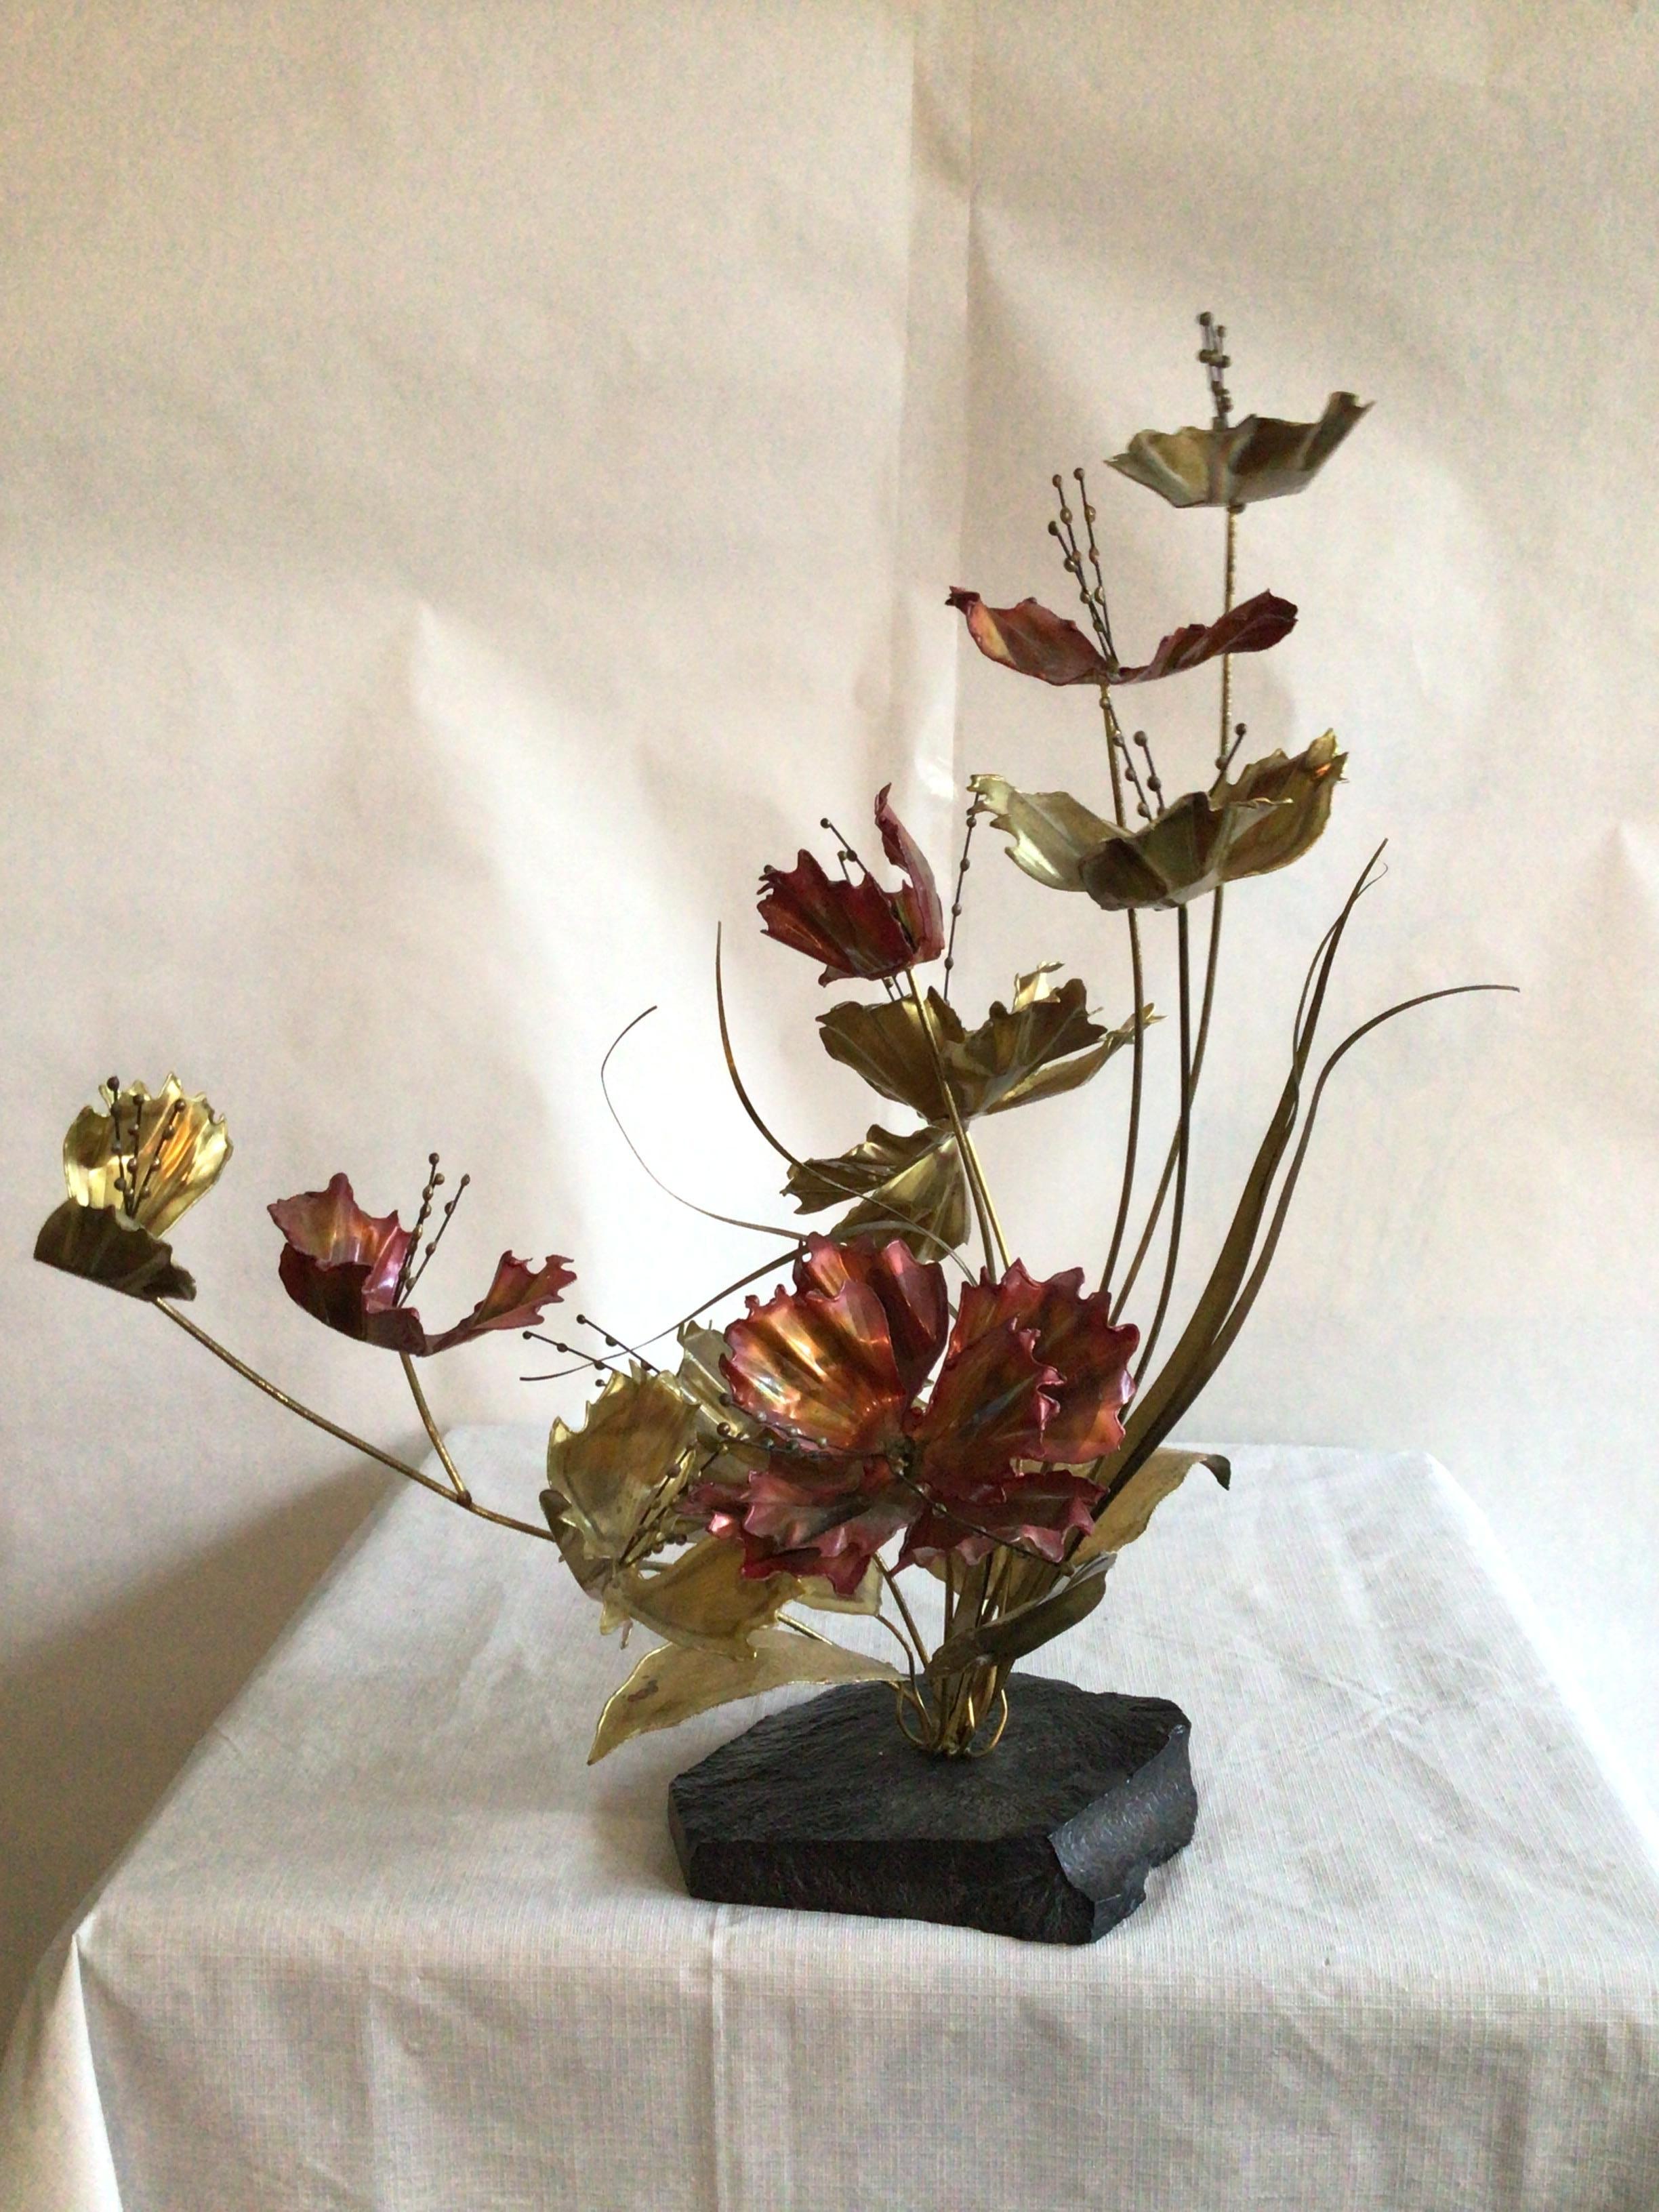 1960s Copper And Brass Brutalist Floral Table Sculpture On Marble Base
Bright Copper and Rose Metal
Sculpture of Flowers and Grasses on a black marble base
